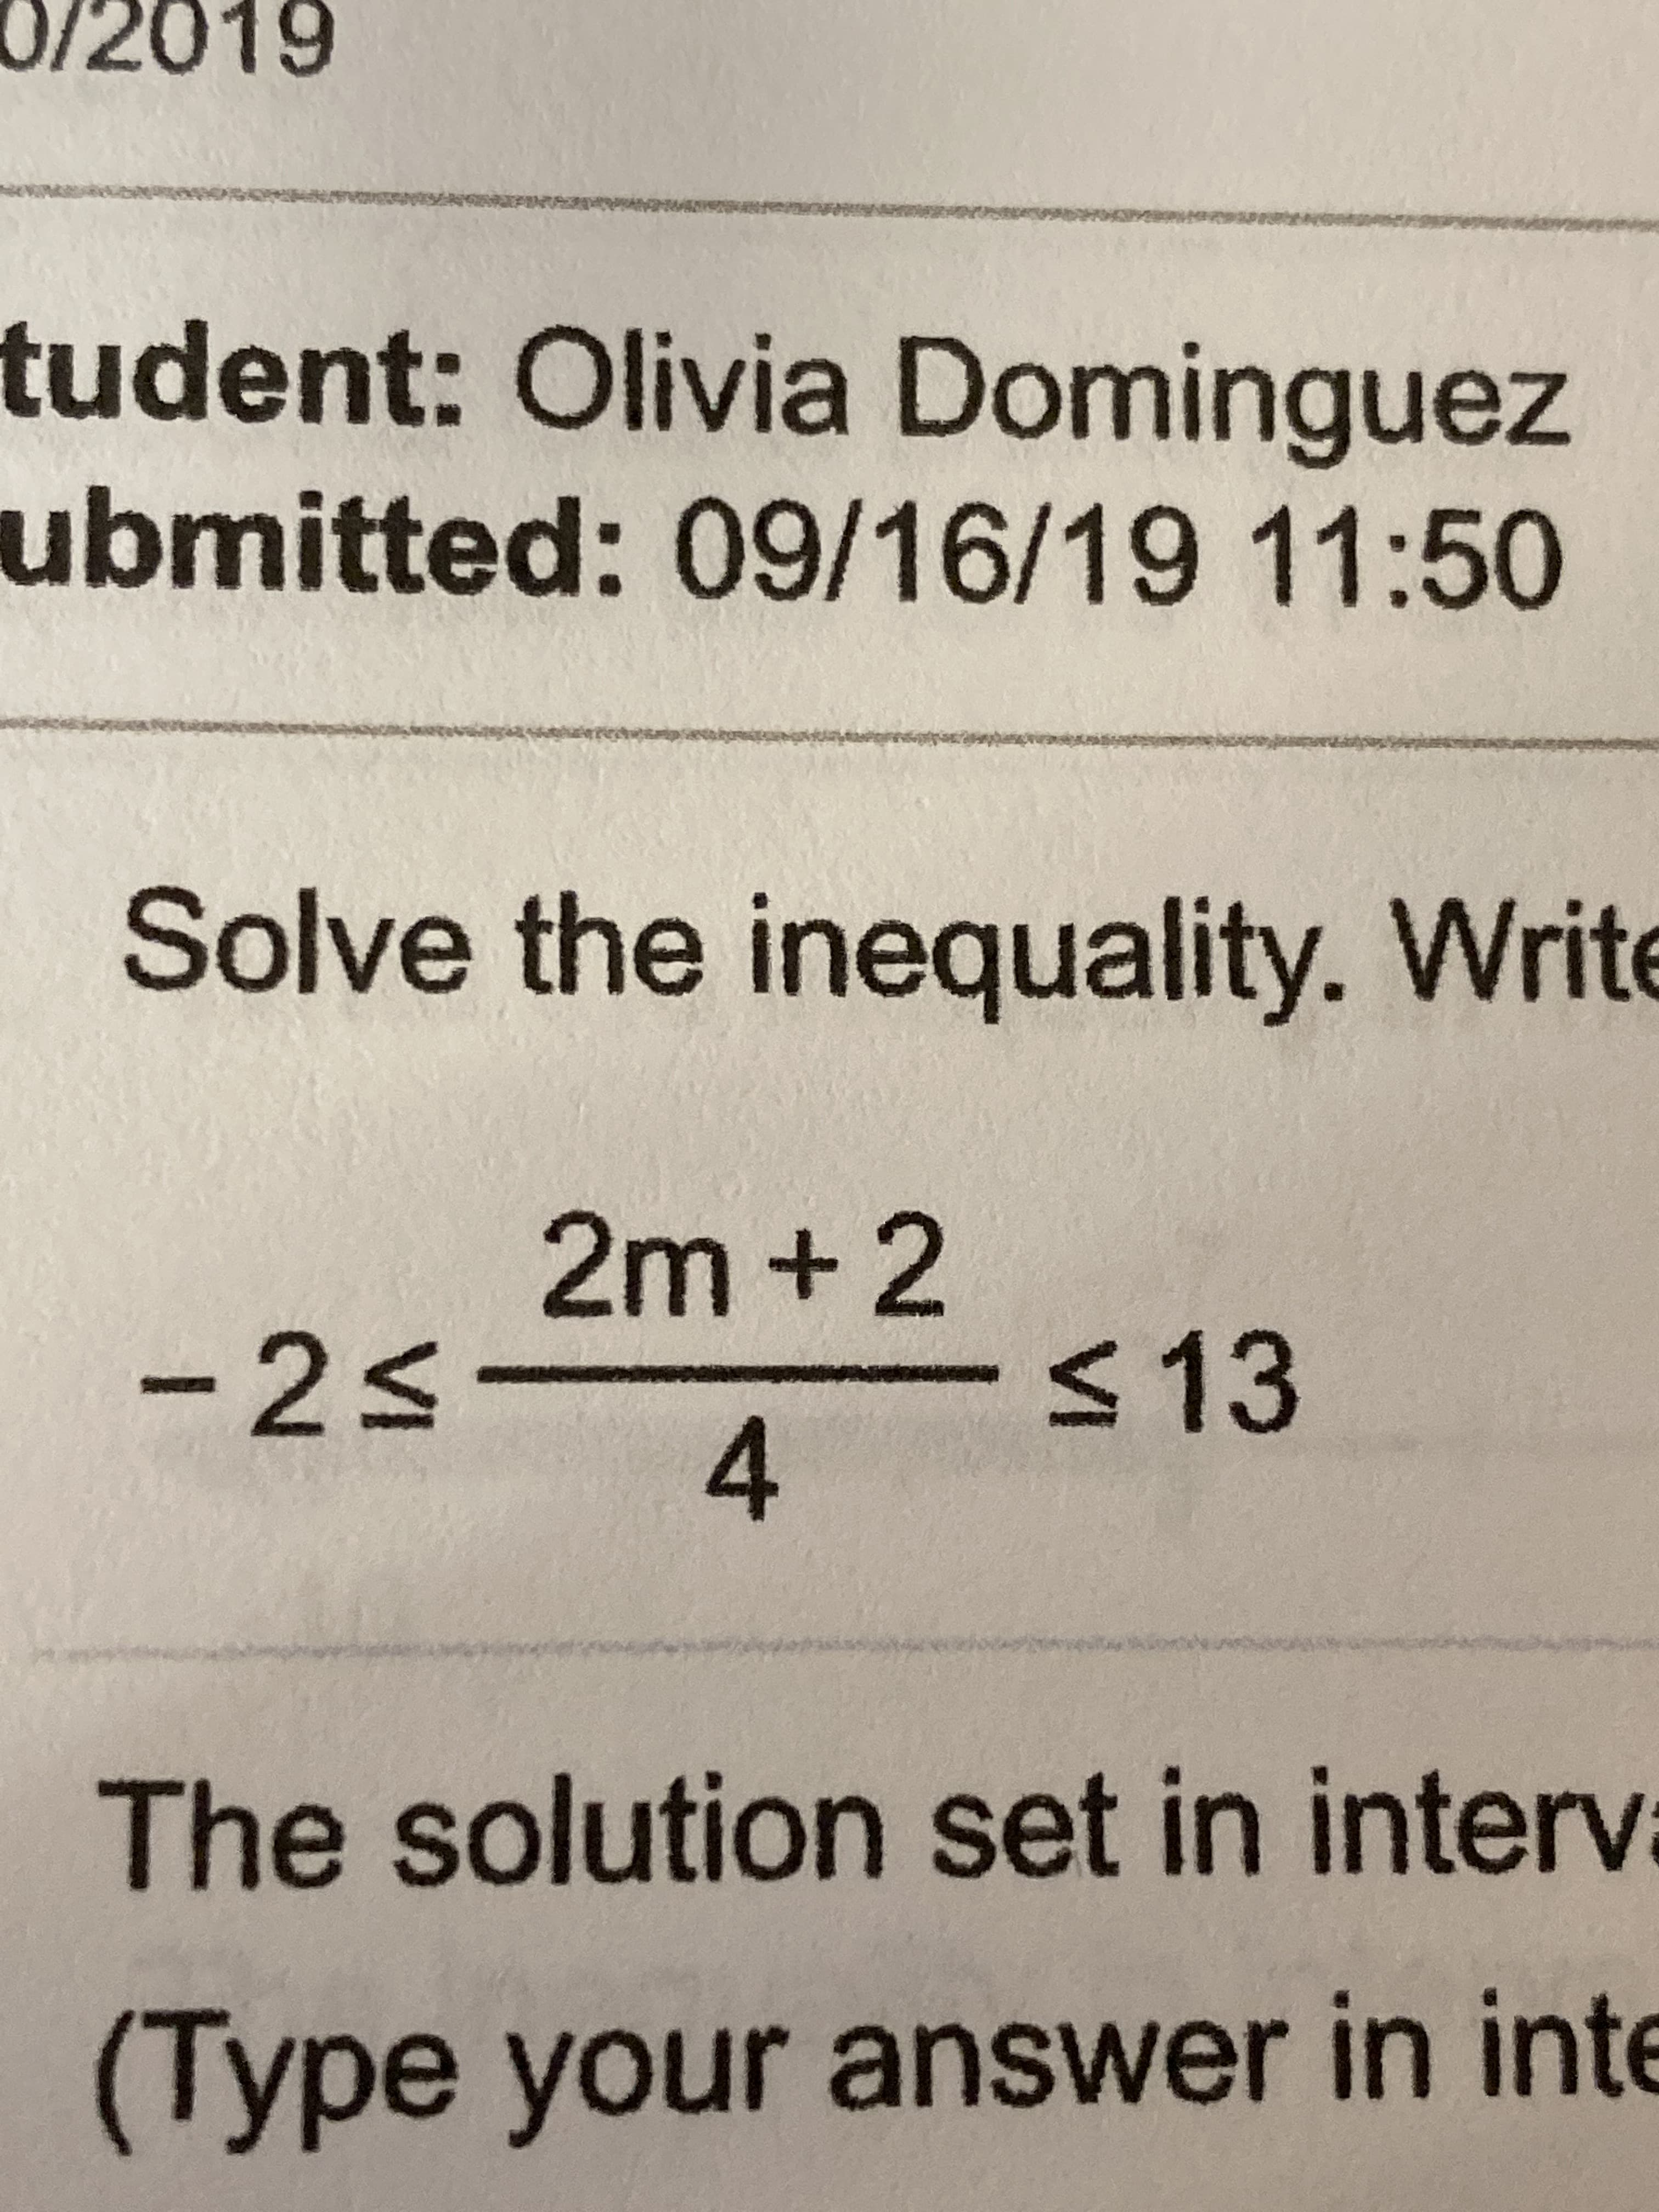 0/2019
tudent: Olivia Dominguez
ubmitted: 09/16/19 11:50
Solve the inequality. Write
2m +2
- 2<
s13
4
The solution set in interv
(Type your answer in inte
